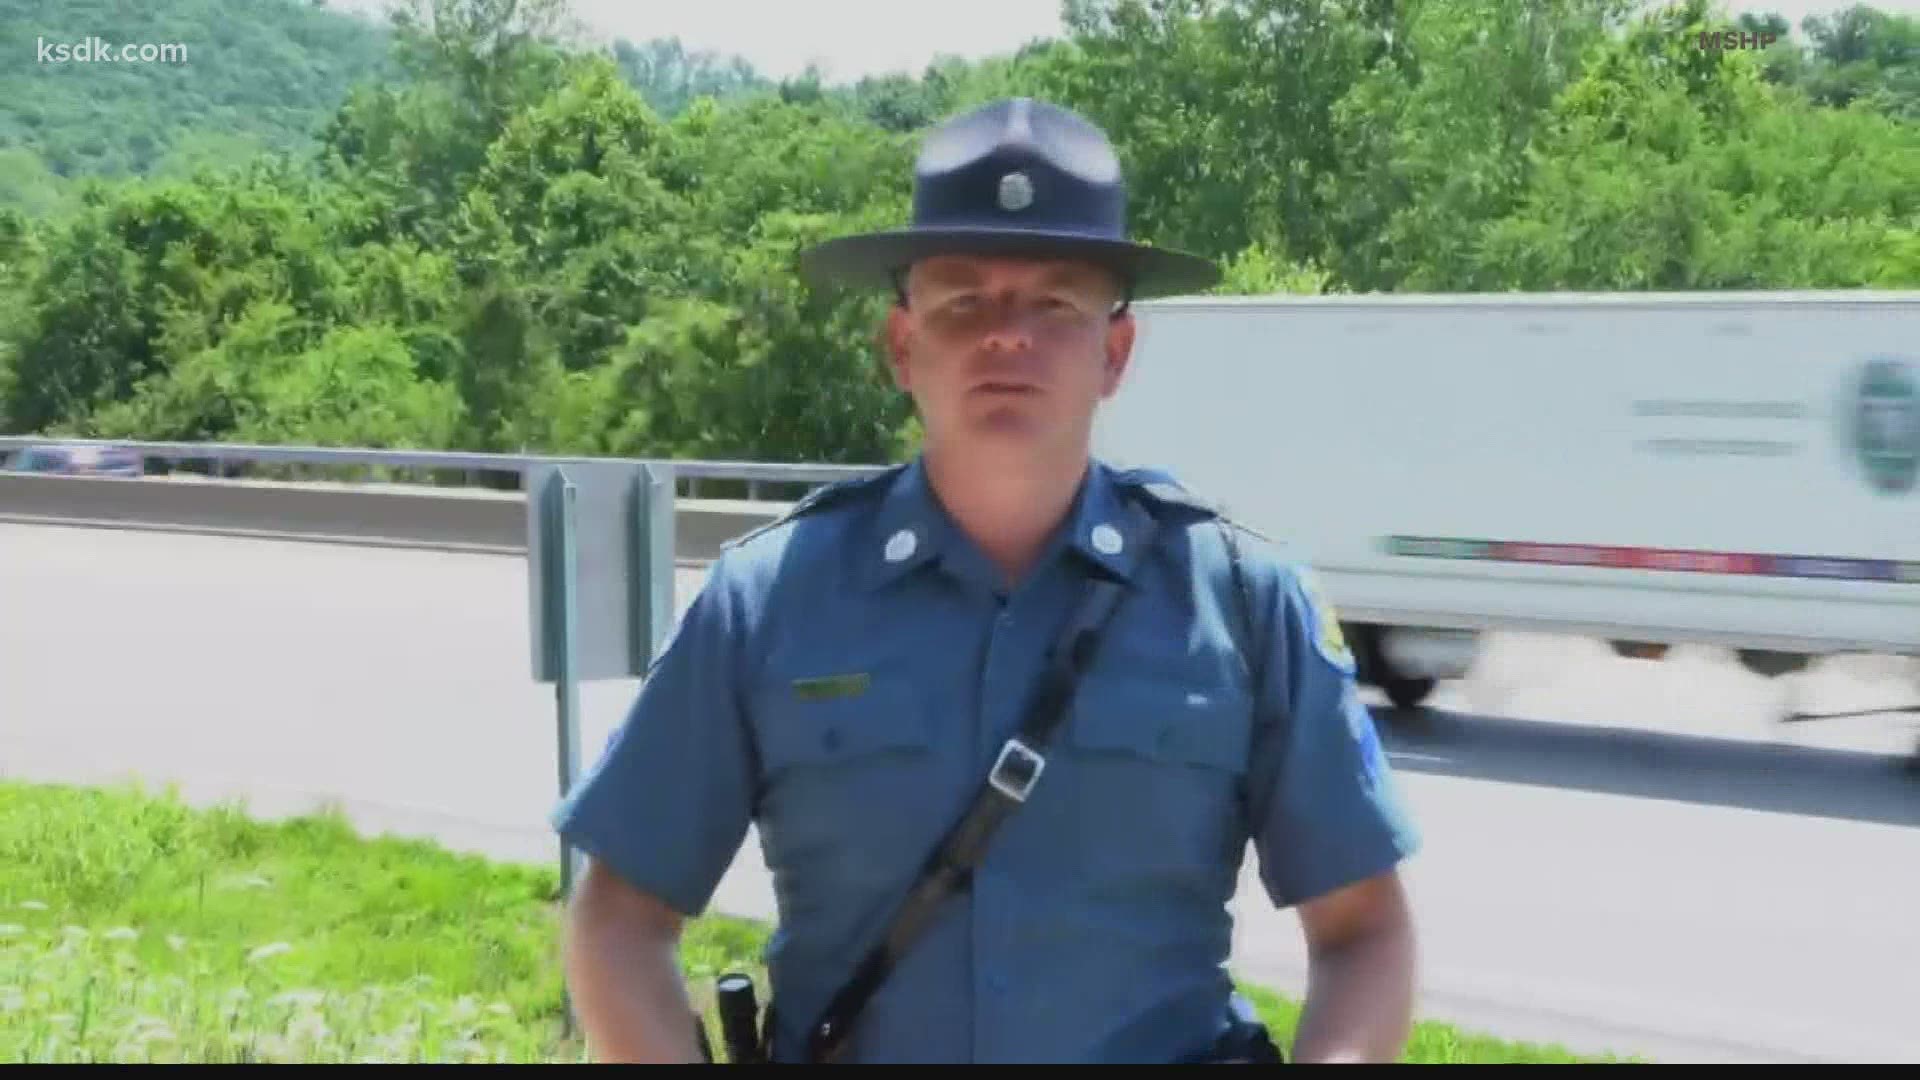 If you come across an angry driver, troopers advise you to call 911 or *55